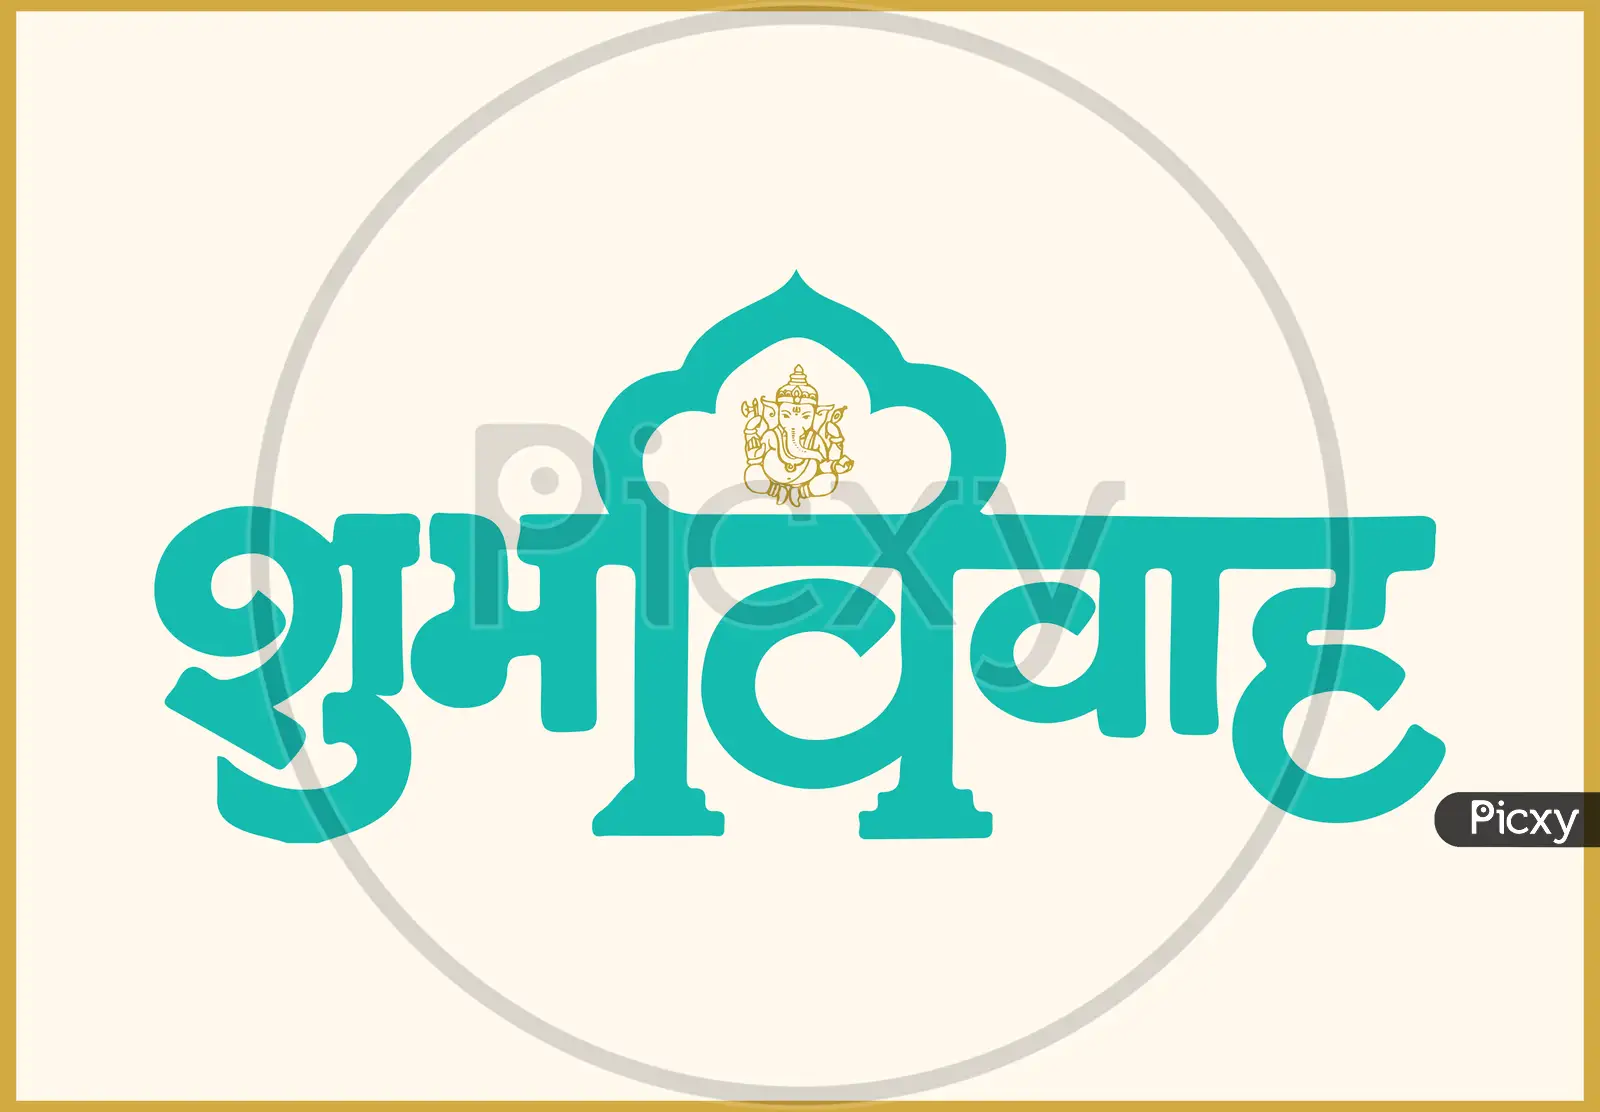 Shubh Vector Design Images, Shubh Vivah Clipart Png Image, Shubh Vivah  Clipart, Shubh Vivah Text, Shubh Vivah Logo Png PNG Image For Free Download